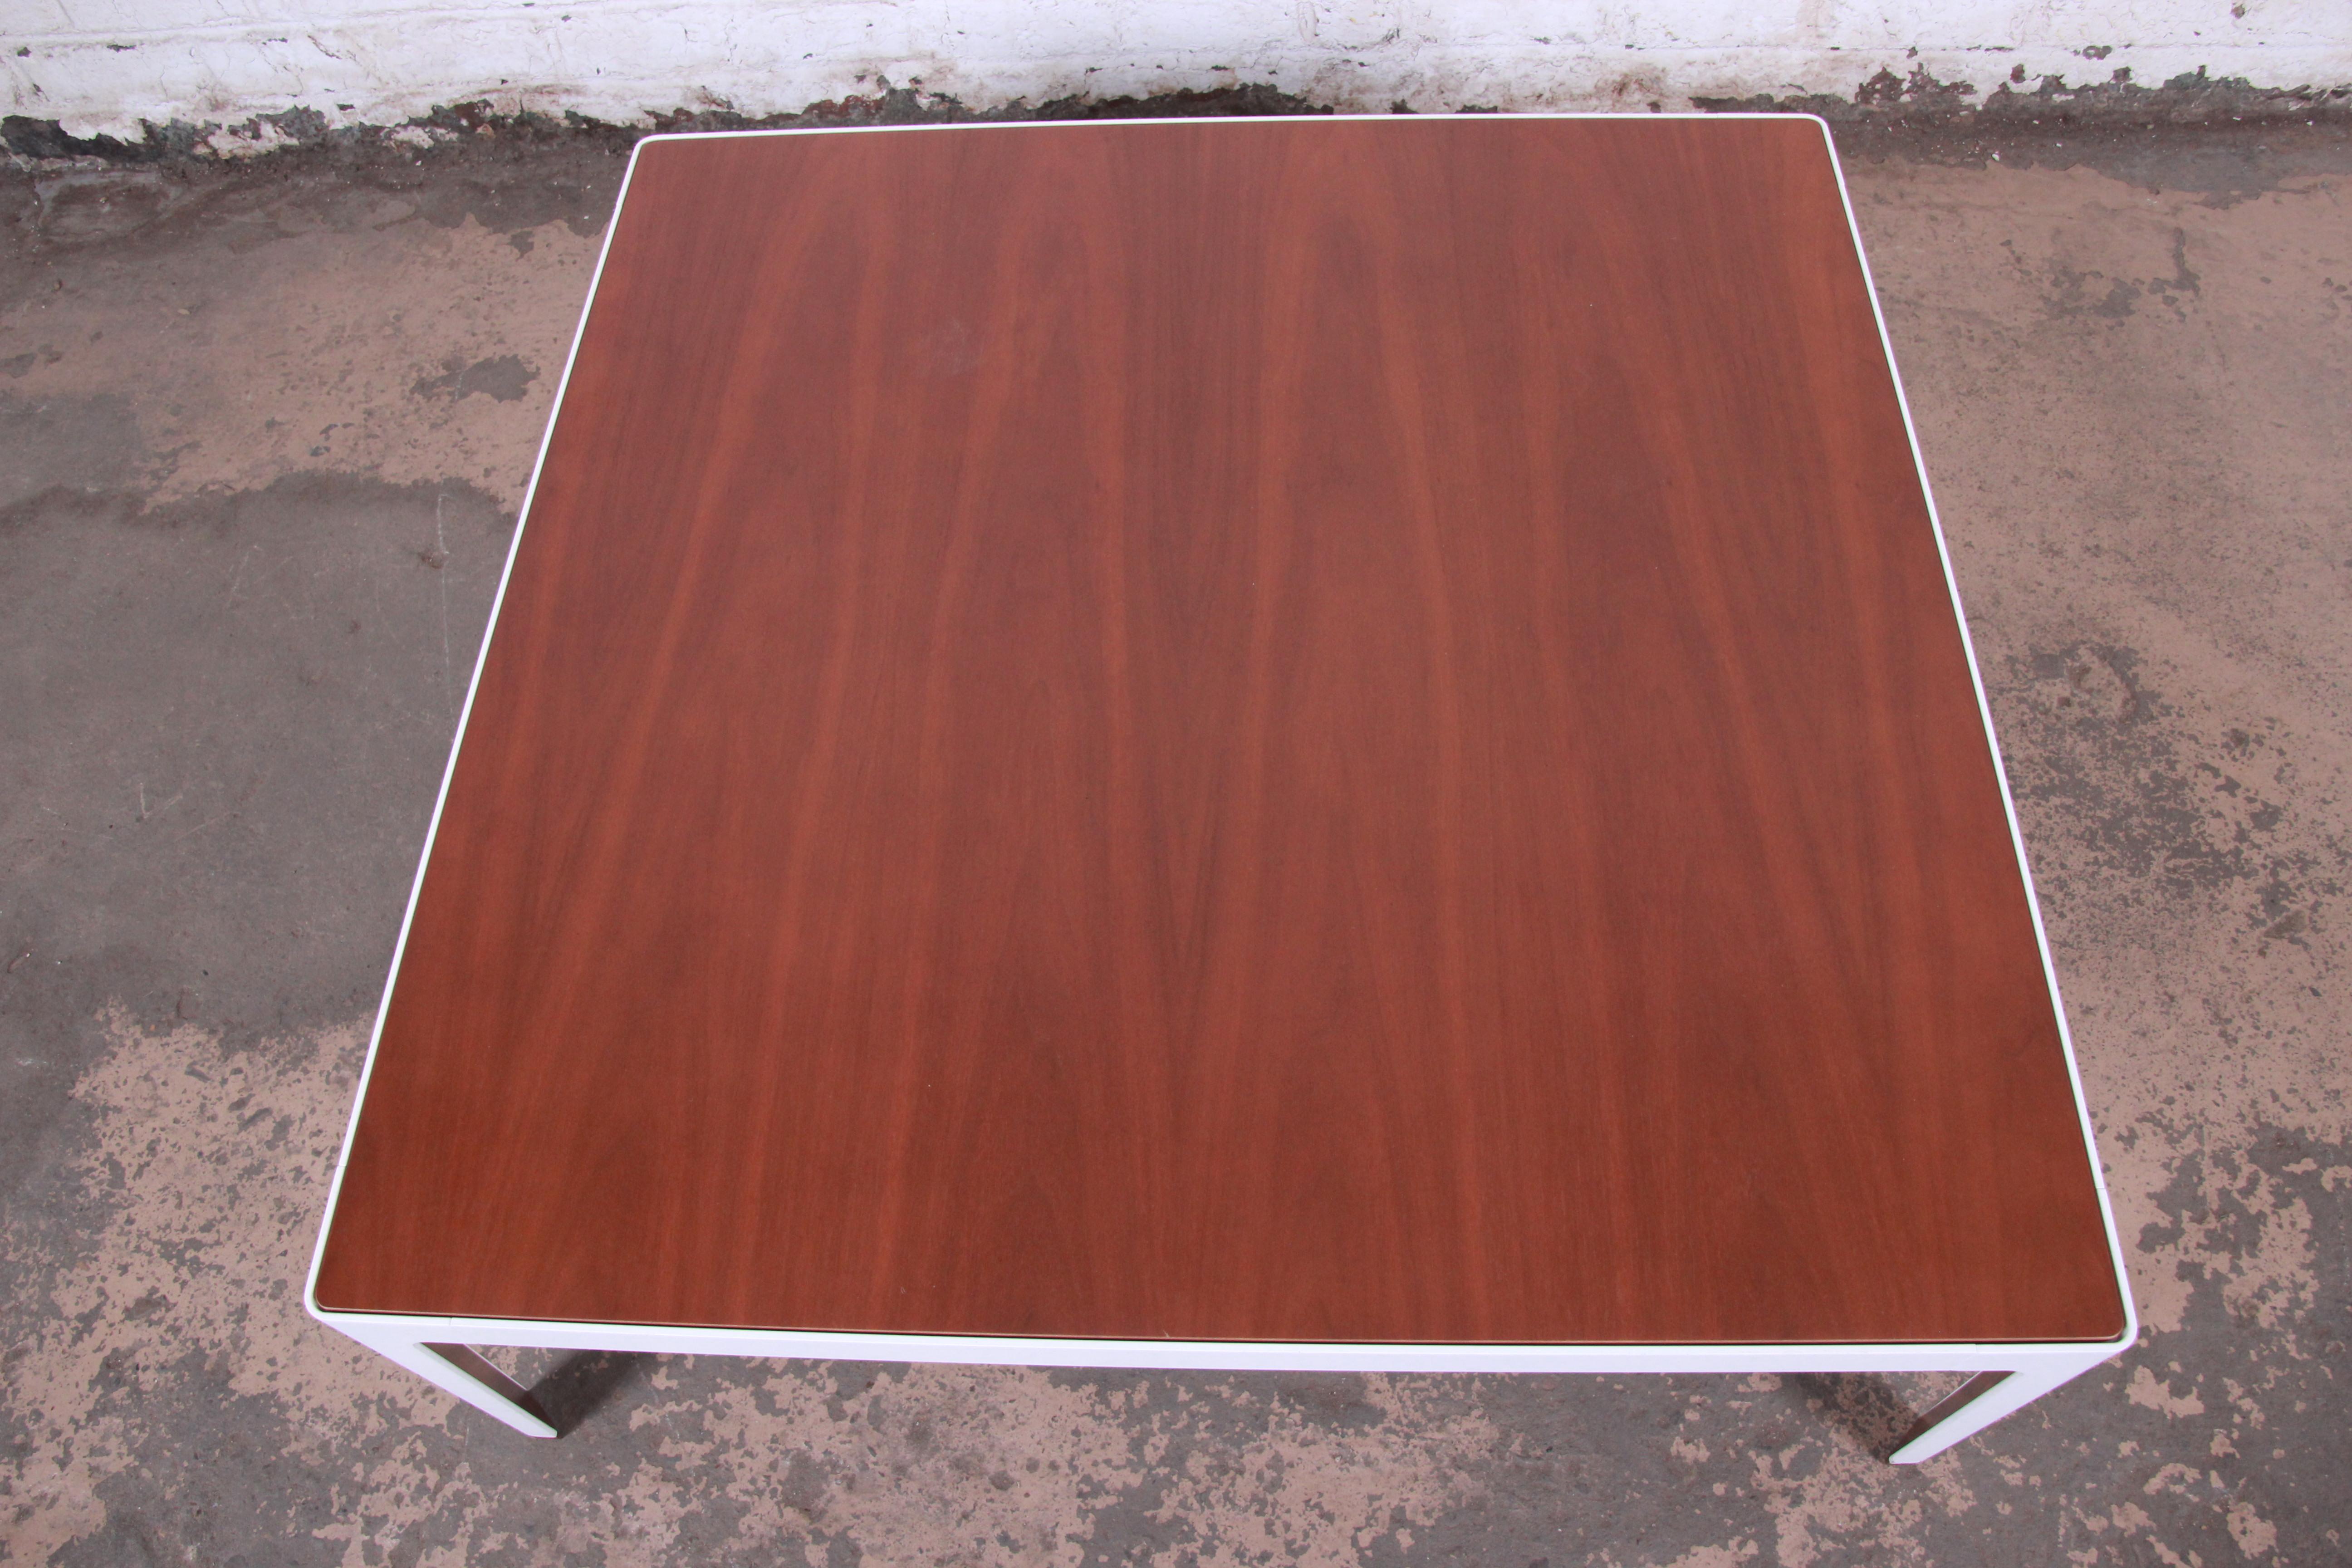 Molded Mid-Century Modern Style Large Square Walnut Coffee Table by Coalesse